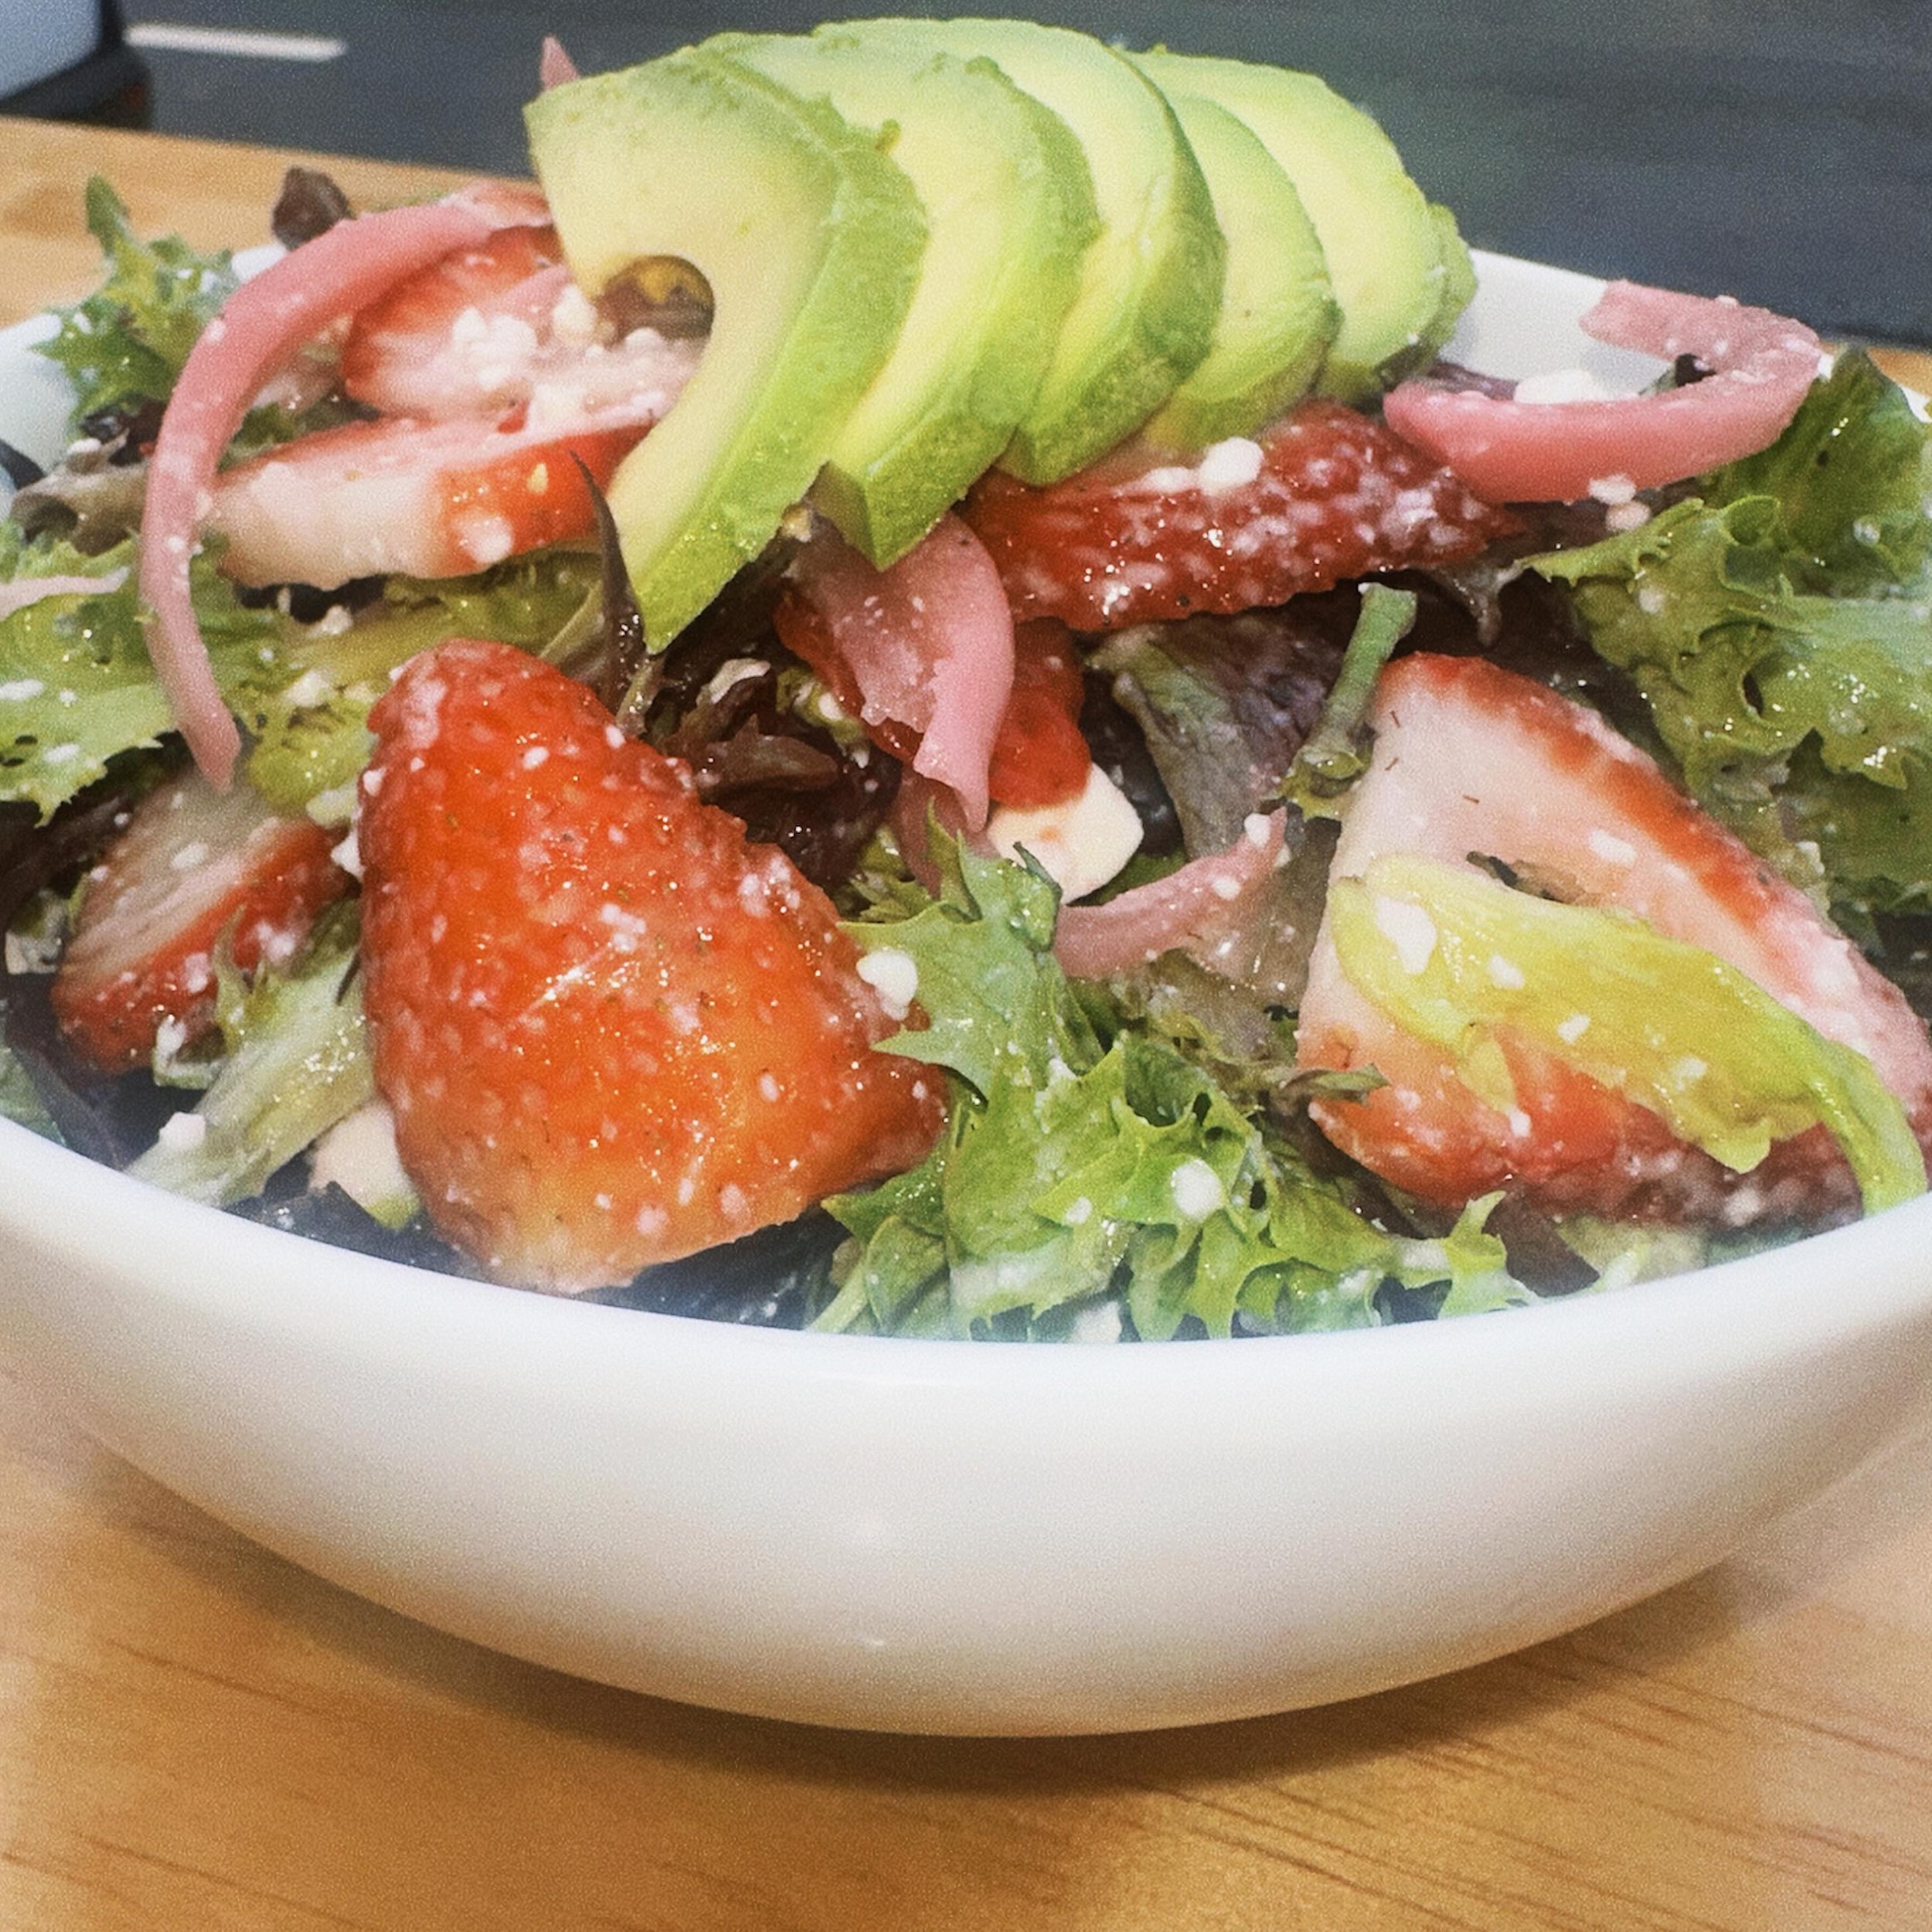 🥗Our Seasonal spring salad has arrived! Strawberries, house pickled red onions, feta, walnuts &amp; avocado over mesclun &amp; drizzled in a strawberry vinaigrette 🌷😋🍓